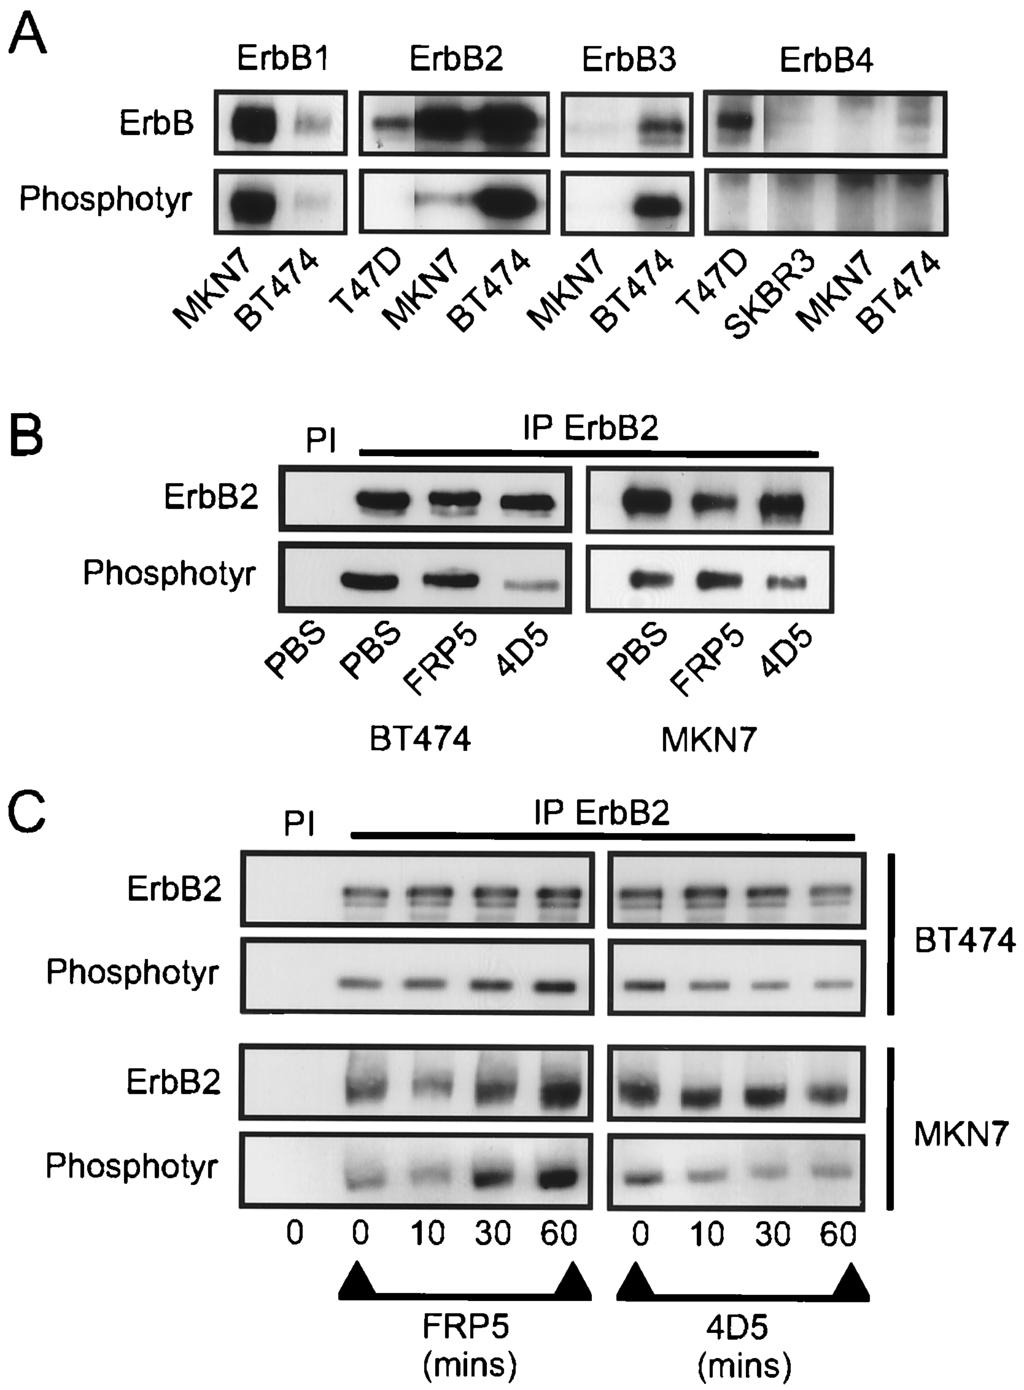 VOL. 20, 2000 MODULATION OF p27 Kip1 FUNCTION BY ErbB2 OVEREXPRESSION 3213 FIG. 2. Screen of ErbB receptor protein and tyrosine phosphorylation levels and effects of anti-erbb2 antibody treatment on tyrosine phosphorylation of the ErbB2 receptor in BT474 and MKN7 cells.